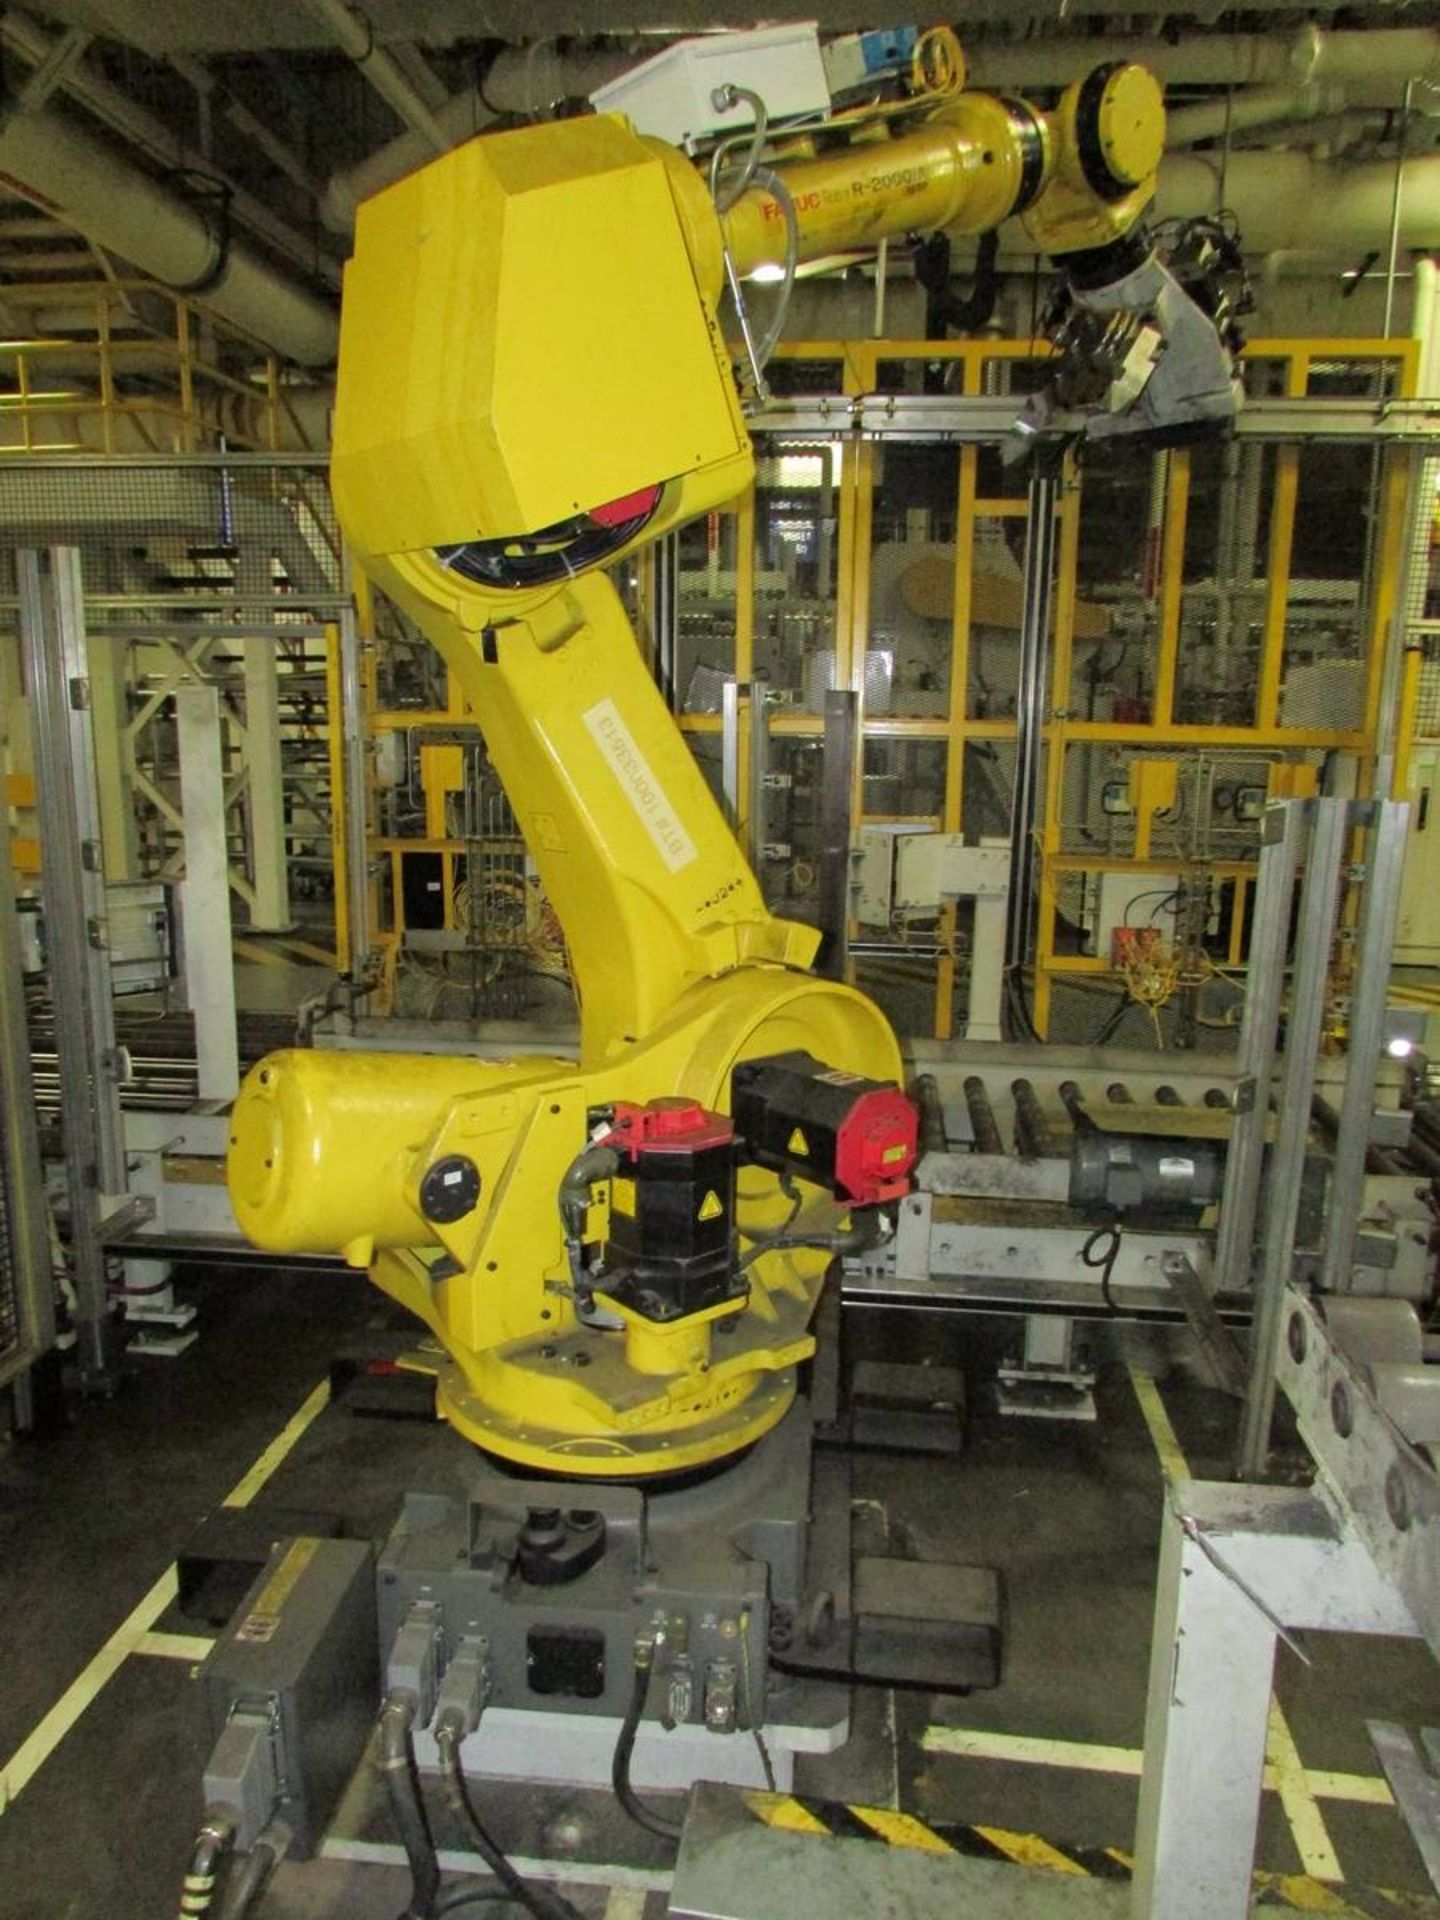 2005 Fanuc R-2000iA 165F 6 Axis Material Handling Robot - Image 5 of 8